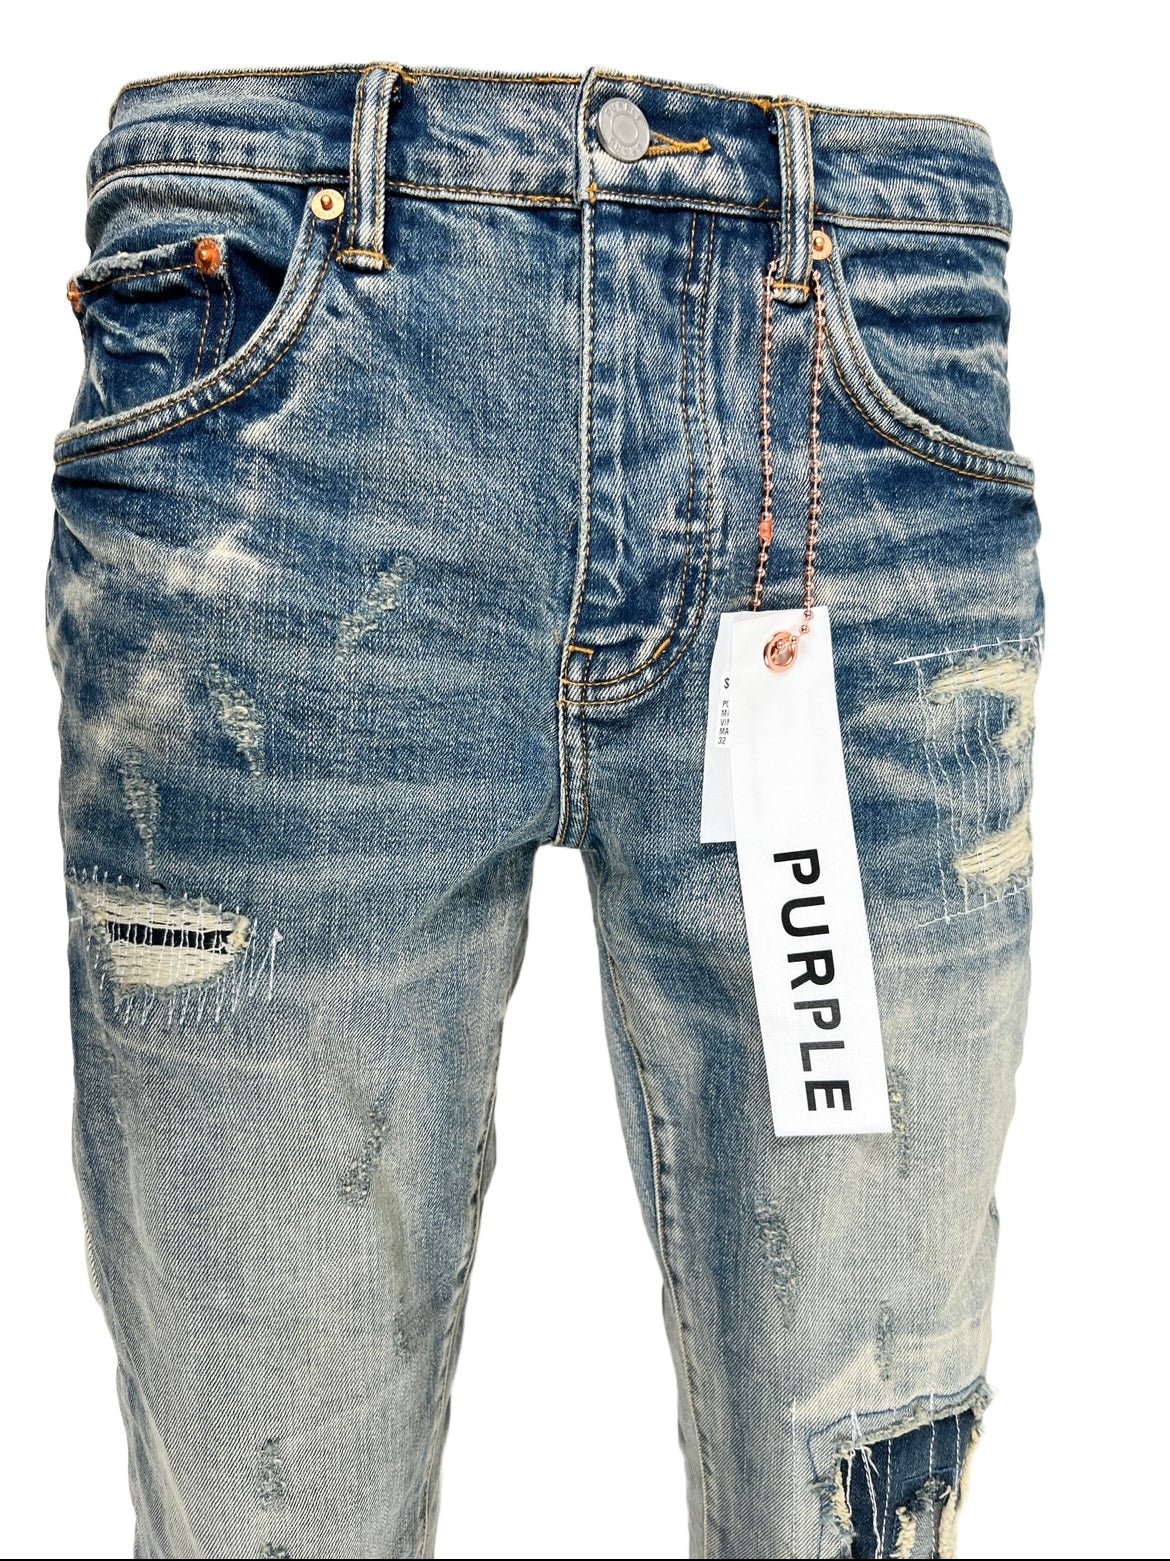 A pair of Purple Brand jeans with a tag on them.